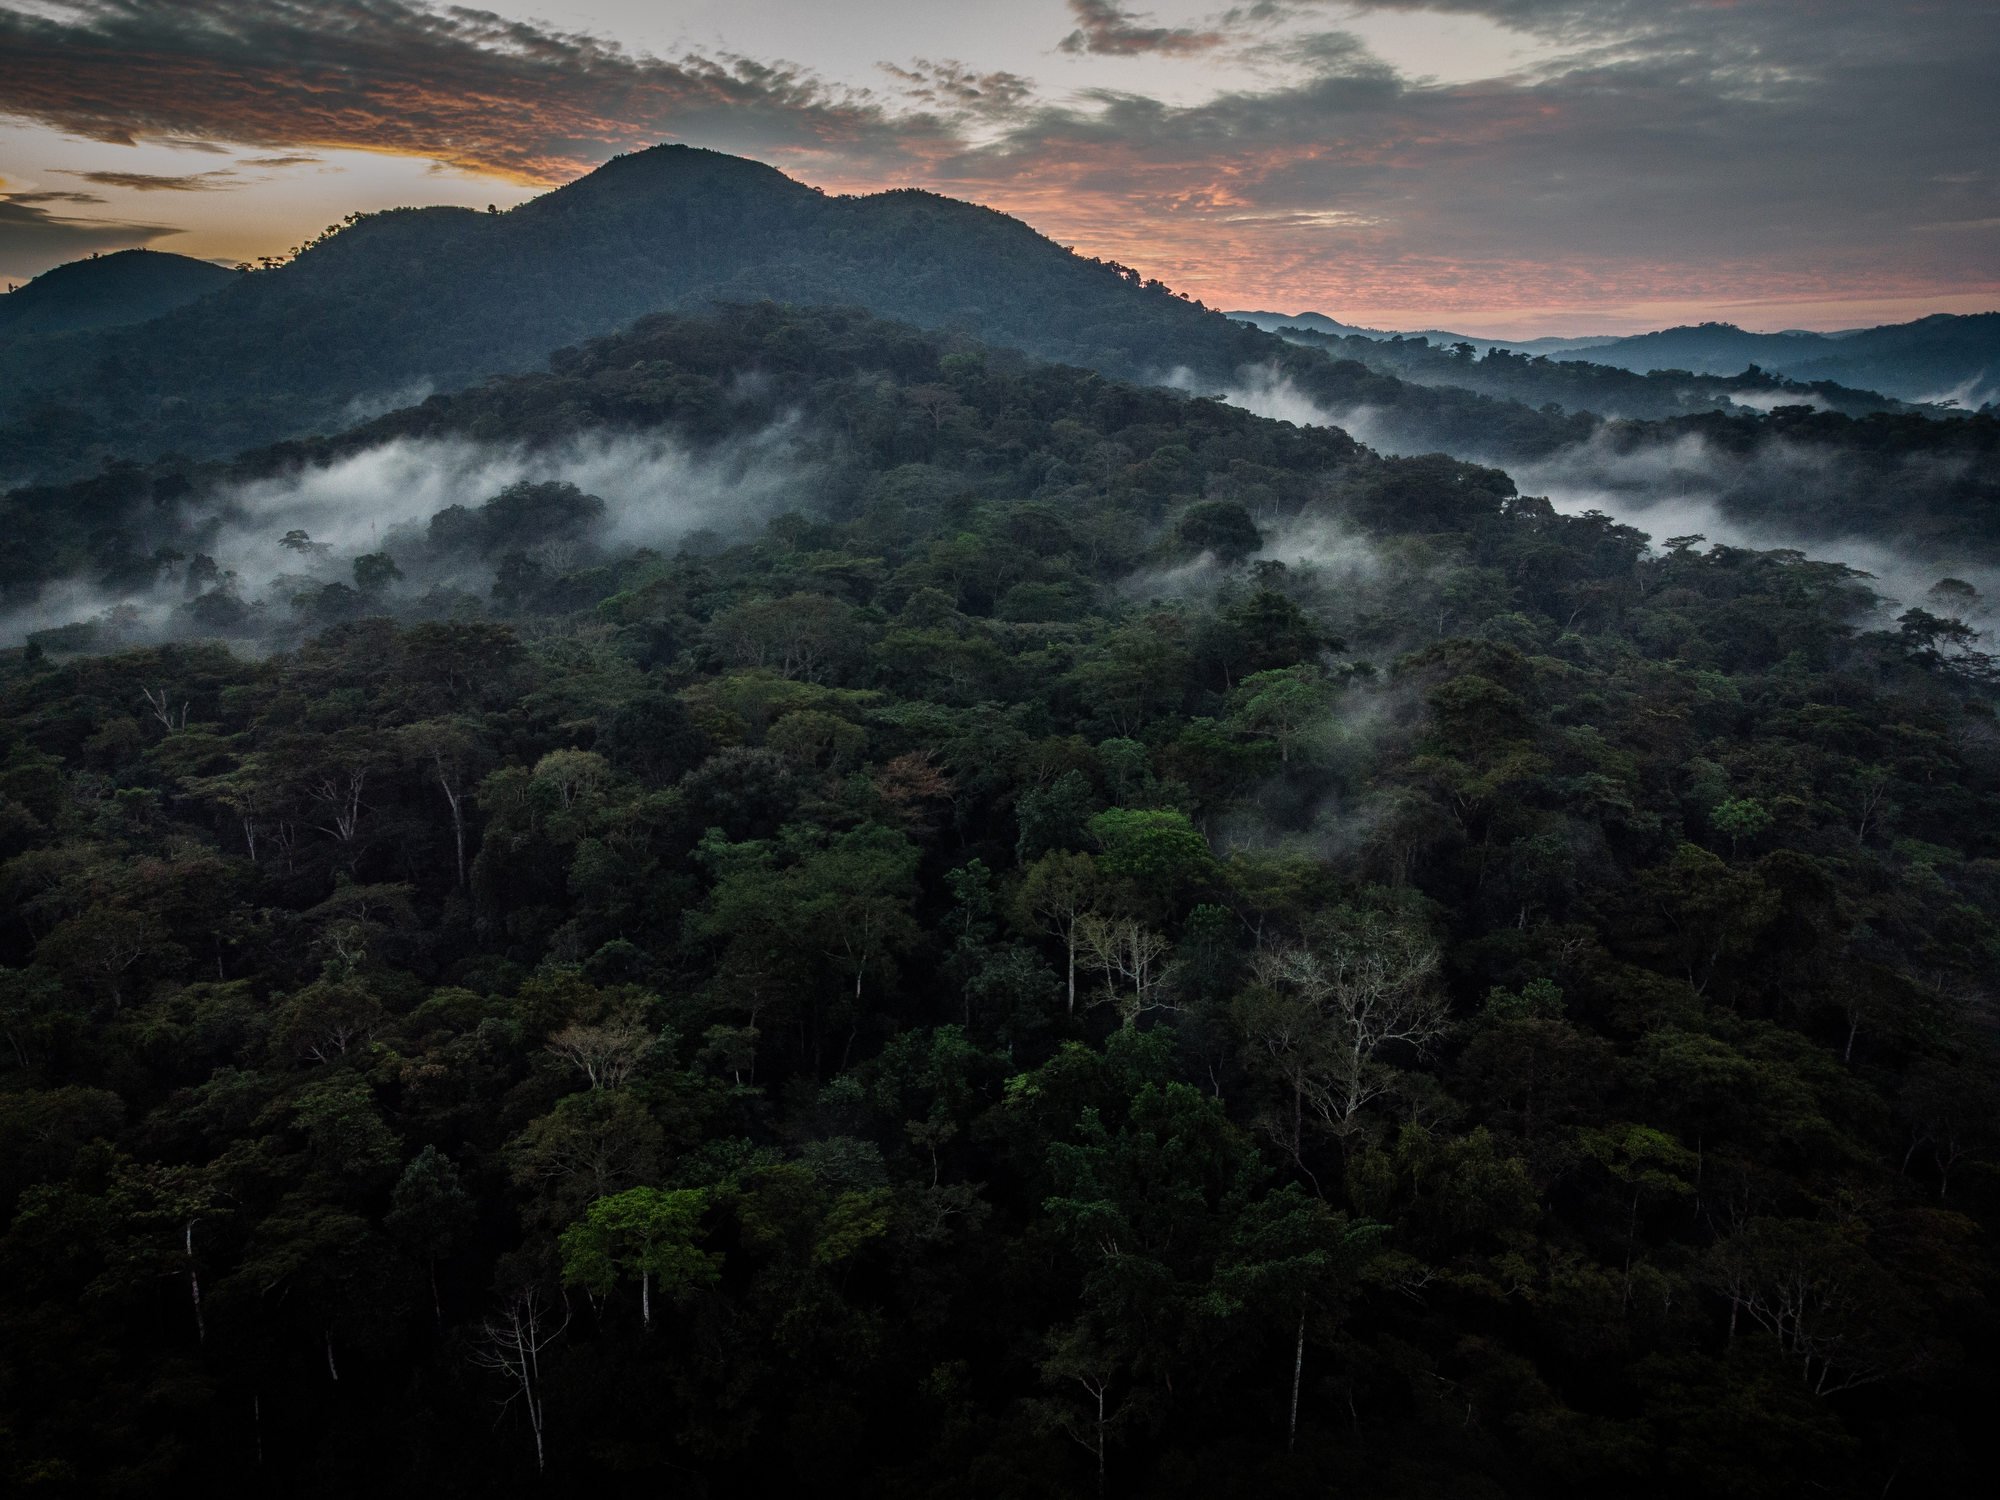  The Ituri Rainforest, seen close to the town of Kilo.  